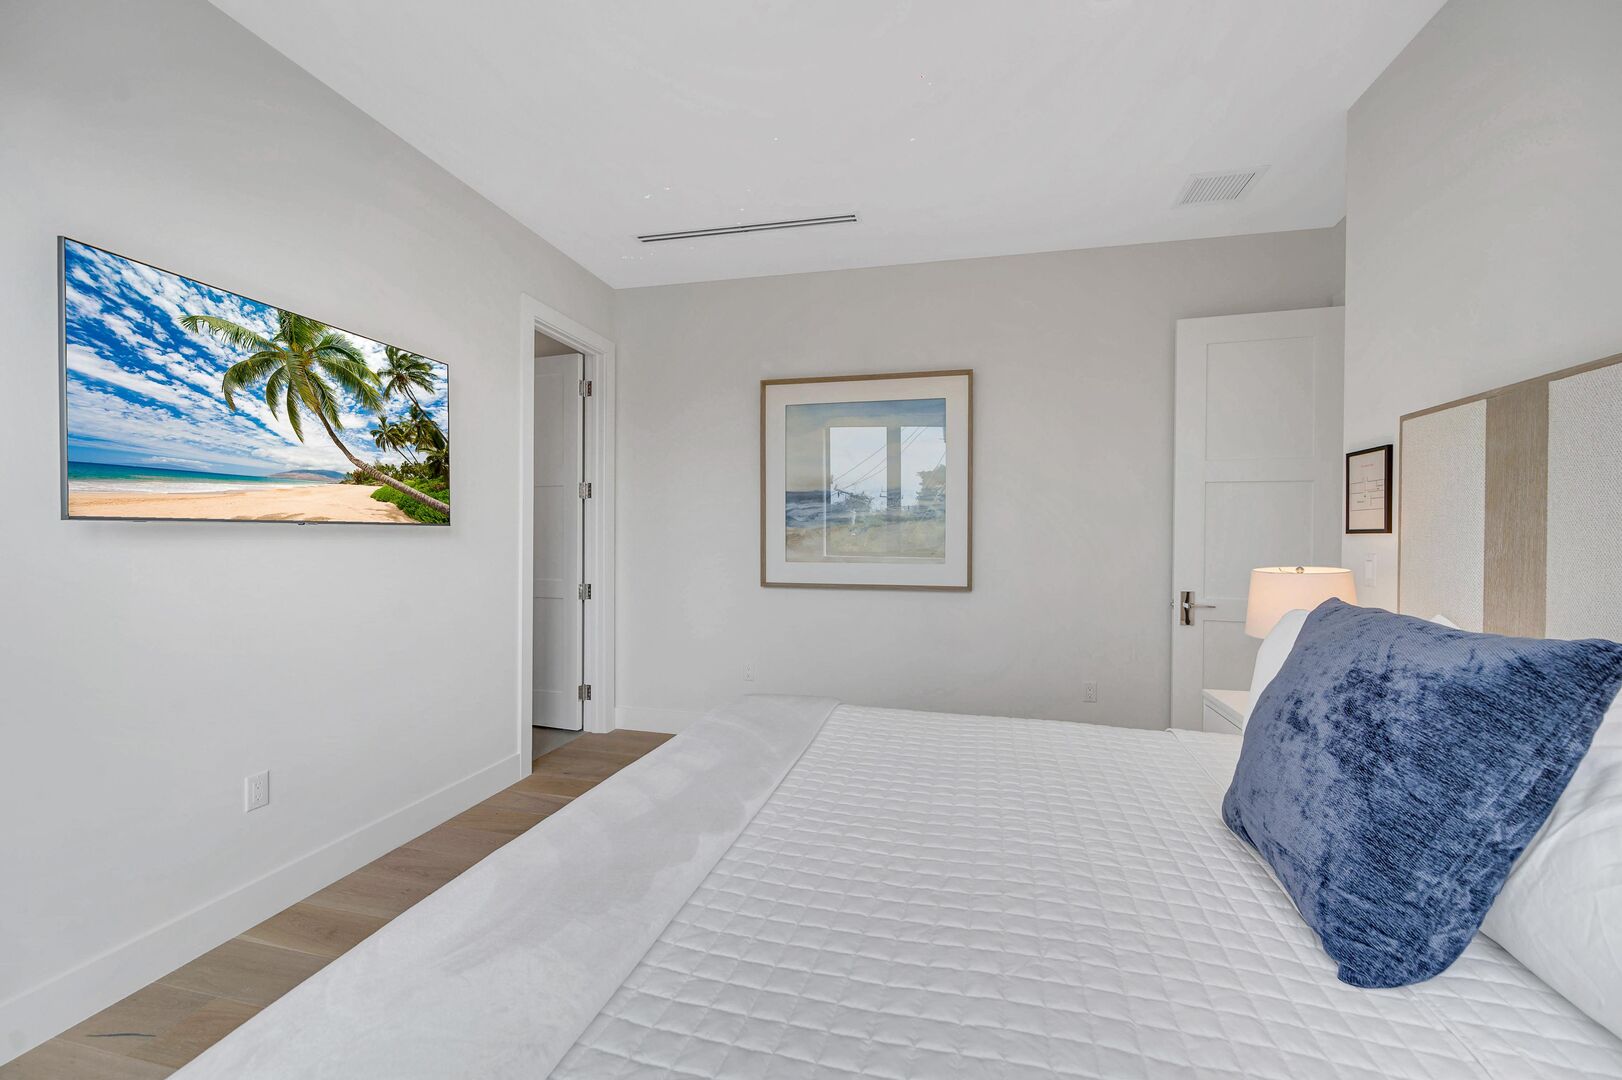 Bedroom Two is located on the third floor featuring an ensuite bathroom.